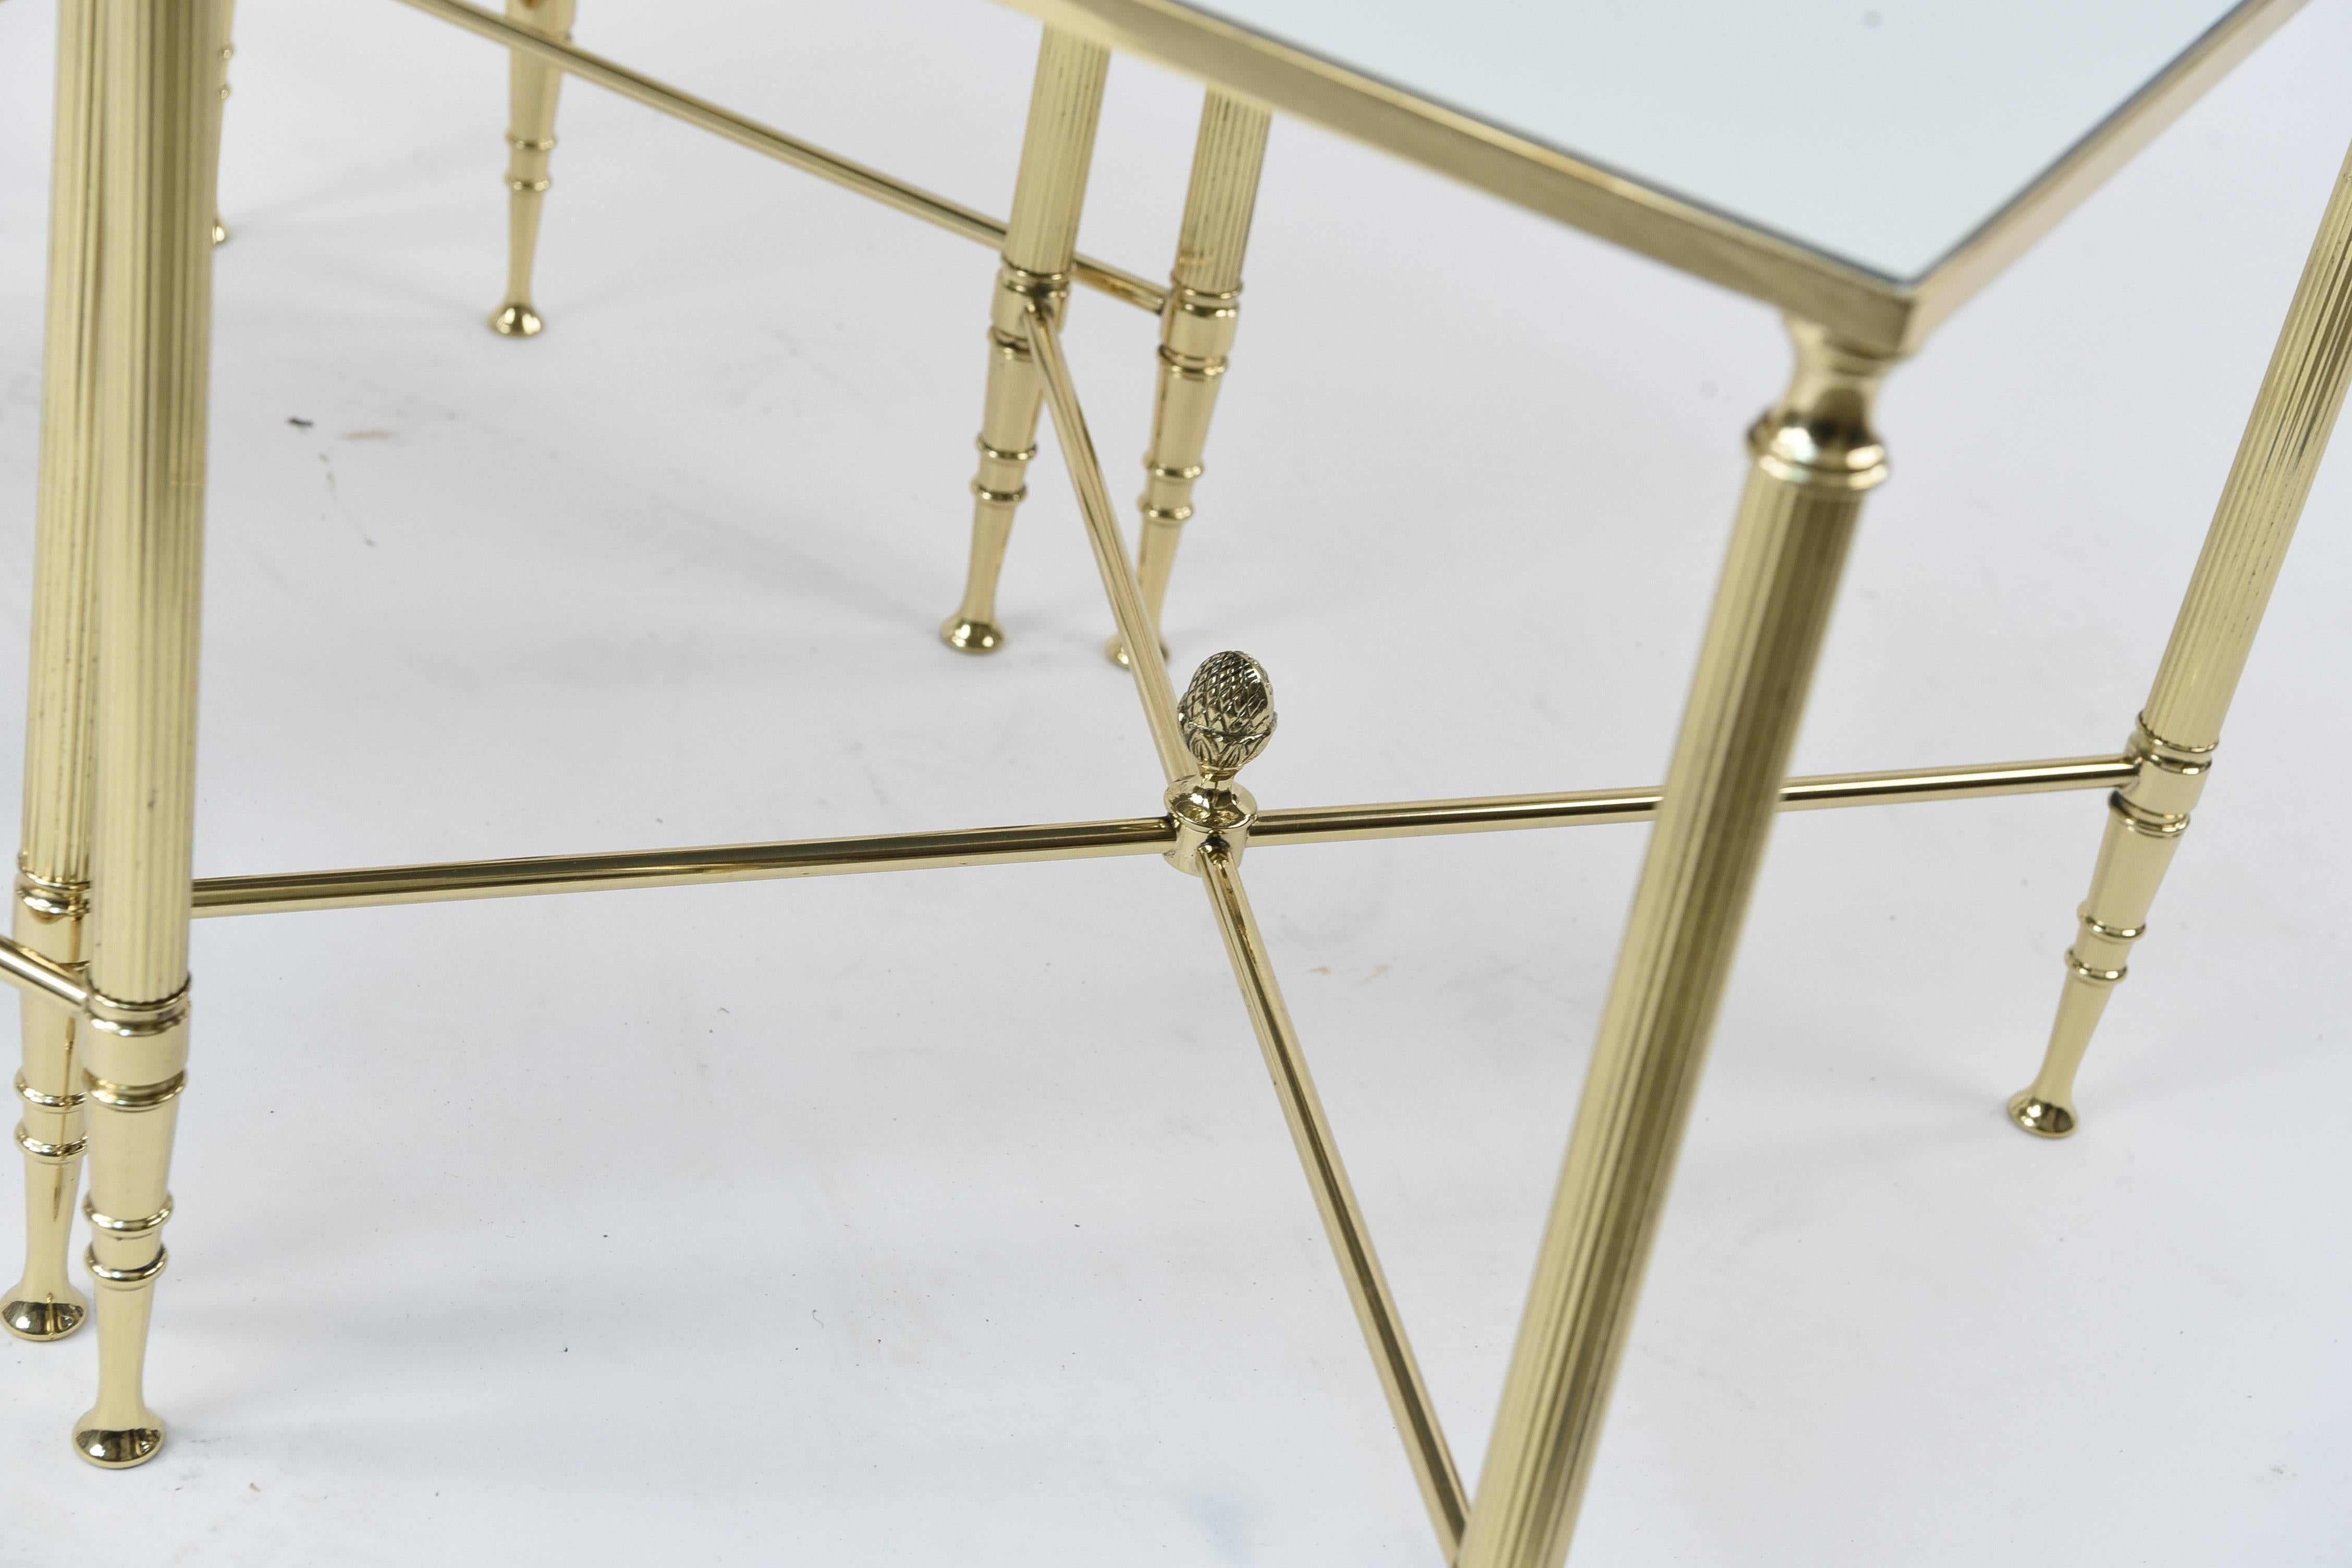 High style with this set of polished brass and mirrored nesting tables! A very sleek and Classic design, these tables will highlight any living room!